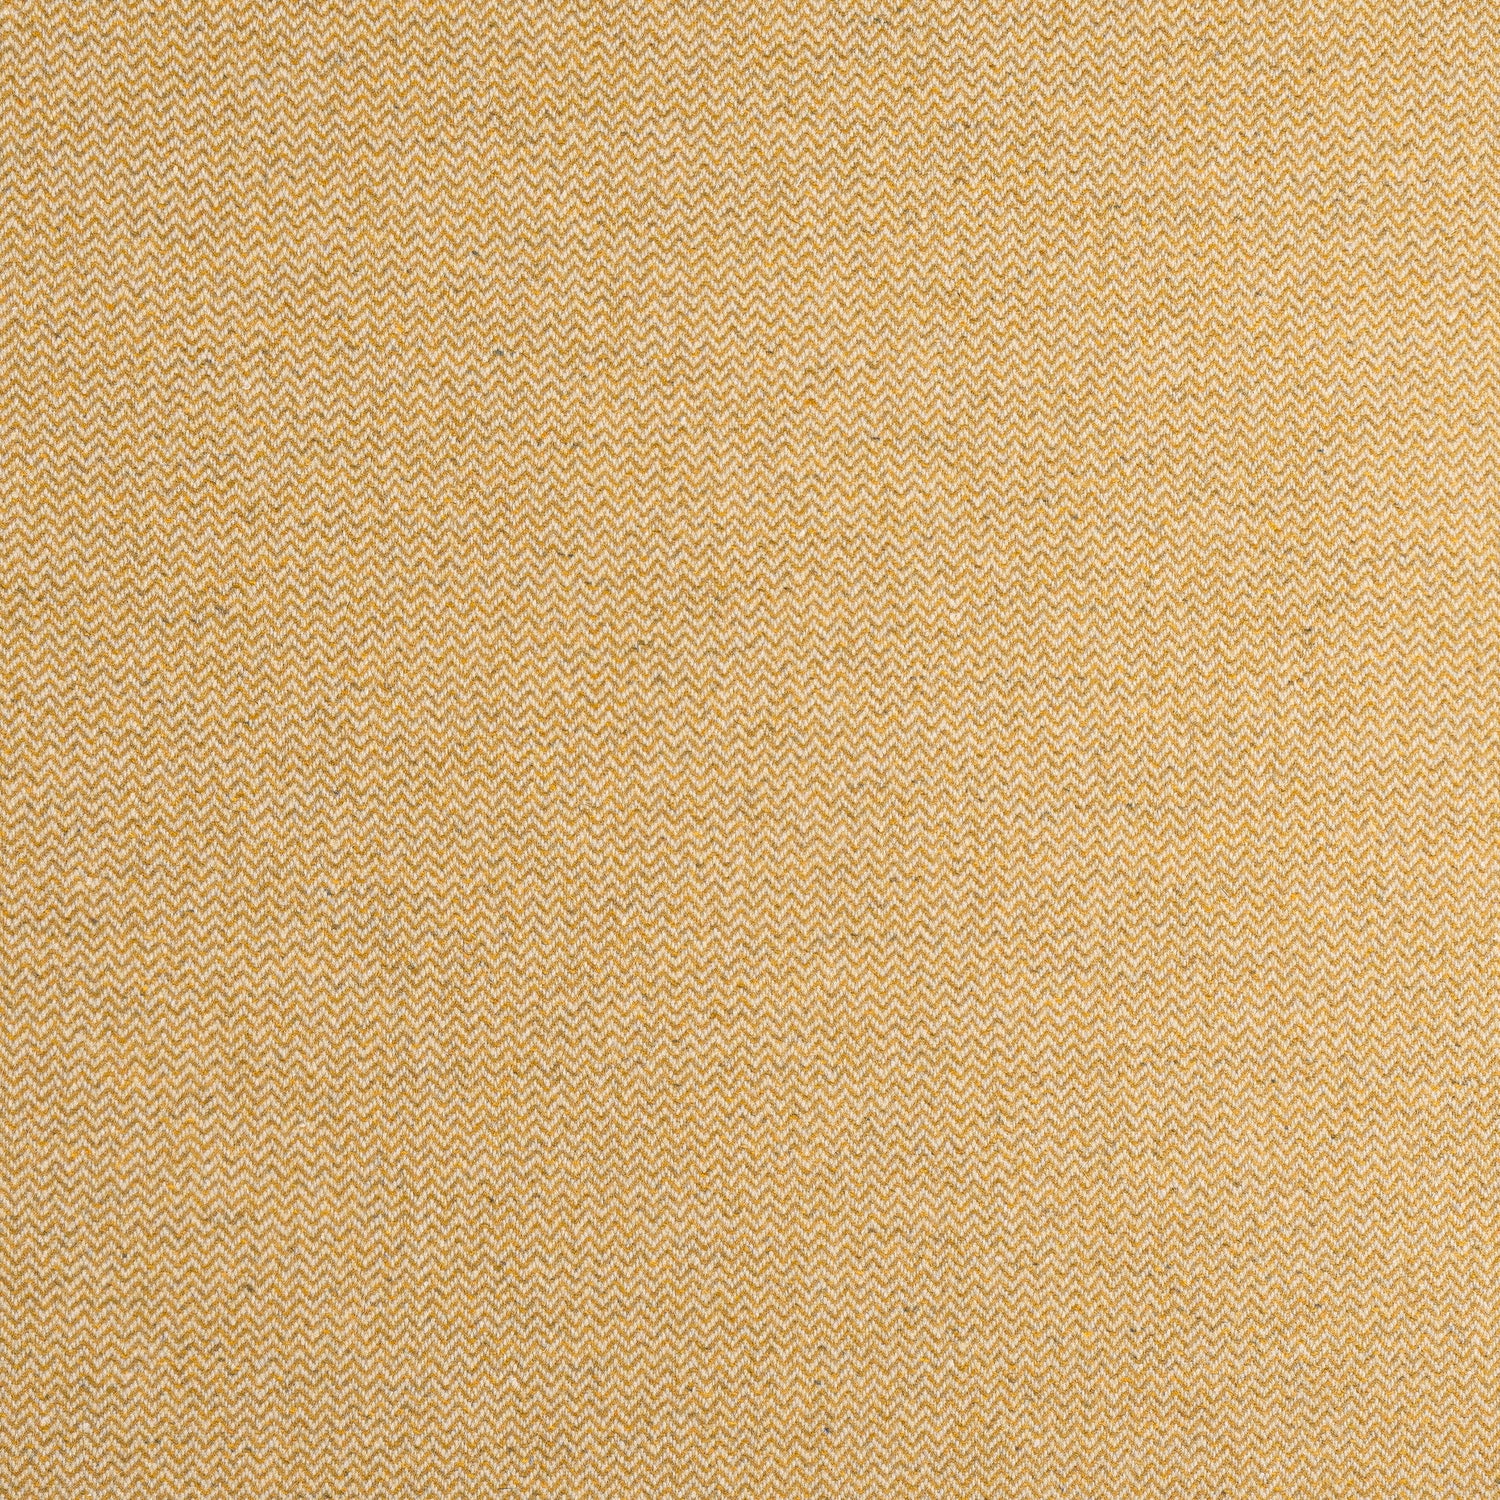 Dorset fabric in honey color - pattern number W80905 - by Thibaut in the Dunmore collection